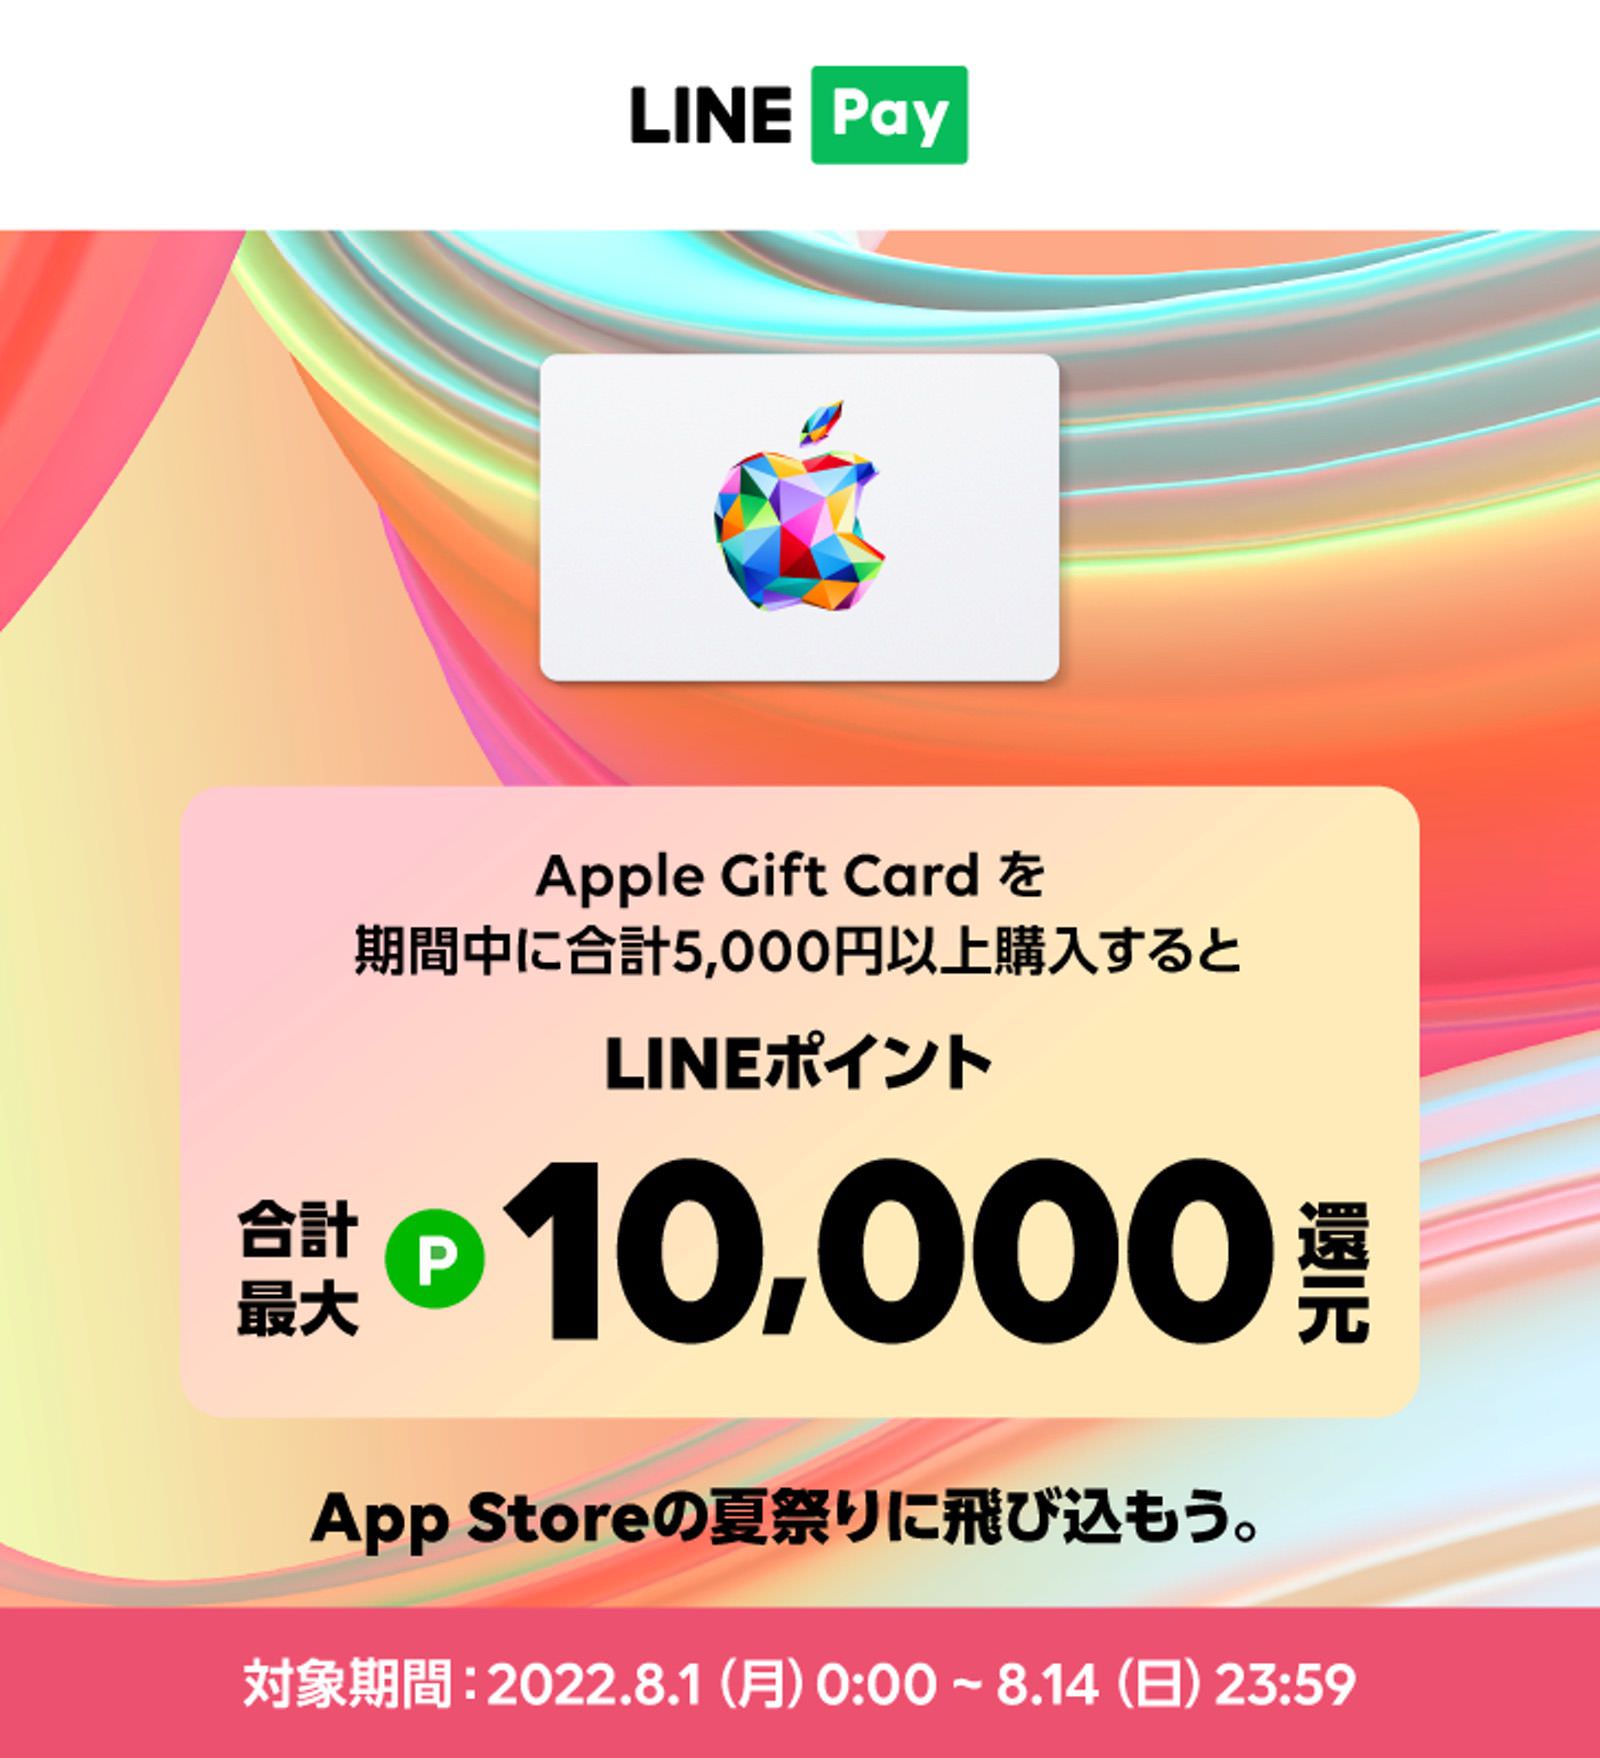 LINE Pay Apple Gift Card Campaign 01